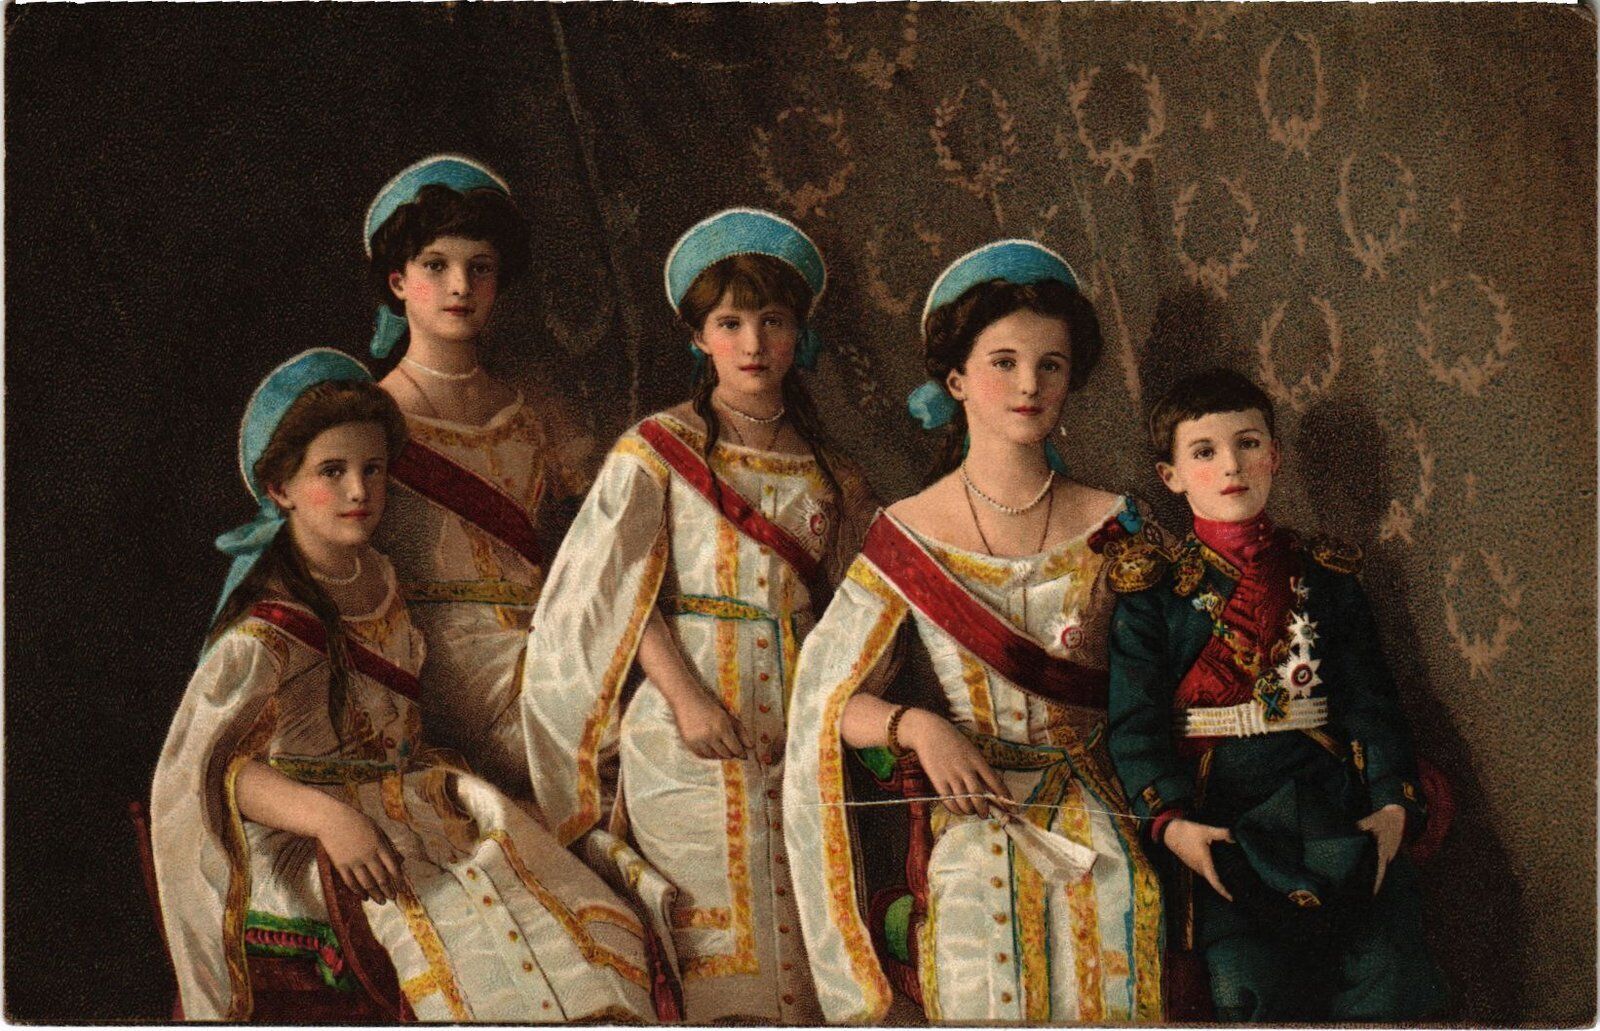 PC RUSSIAN ROYALTY ROMANOV IMPERIAL CHILDREN (a56703)